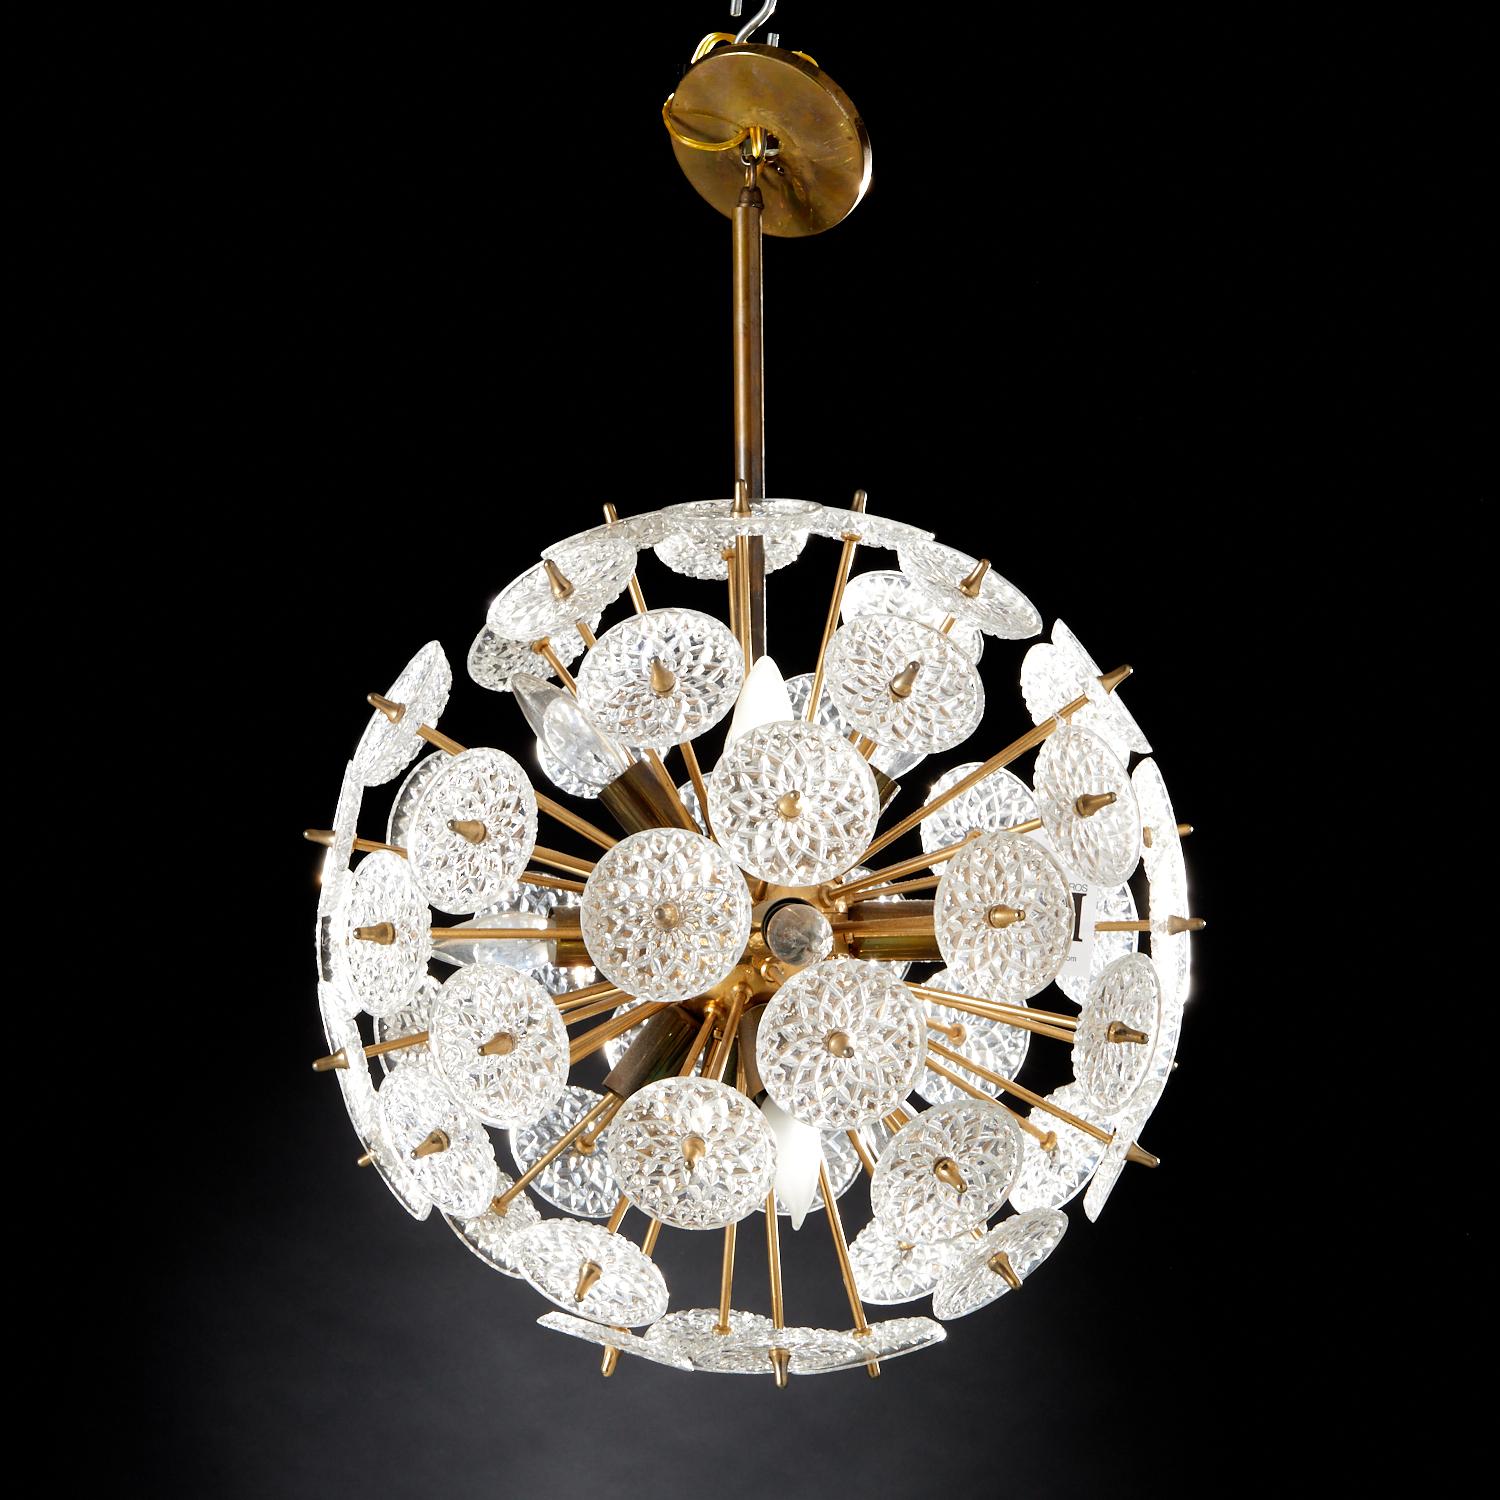 Val Saint Lambert c. 1960s, Belgian, with brass armature and crystal glass flowers, a pendant fixture in the style of Emil Stejnar. A show stopping light fixture that would work beautifully in a variety of design settings. Others show this fixture